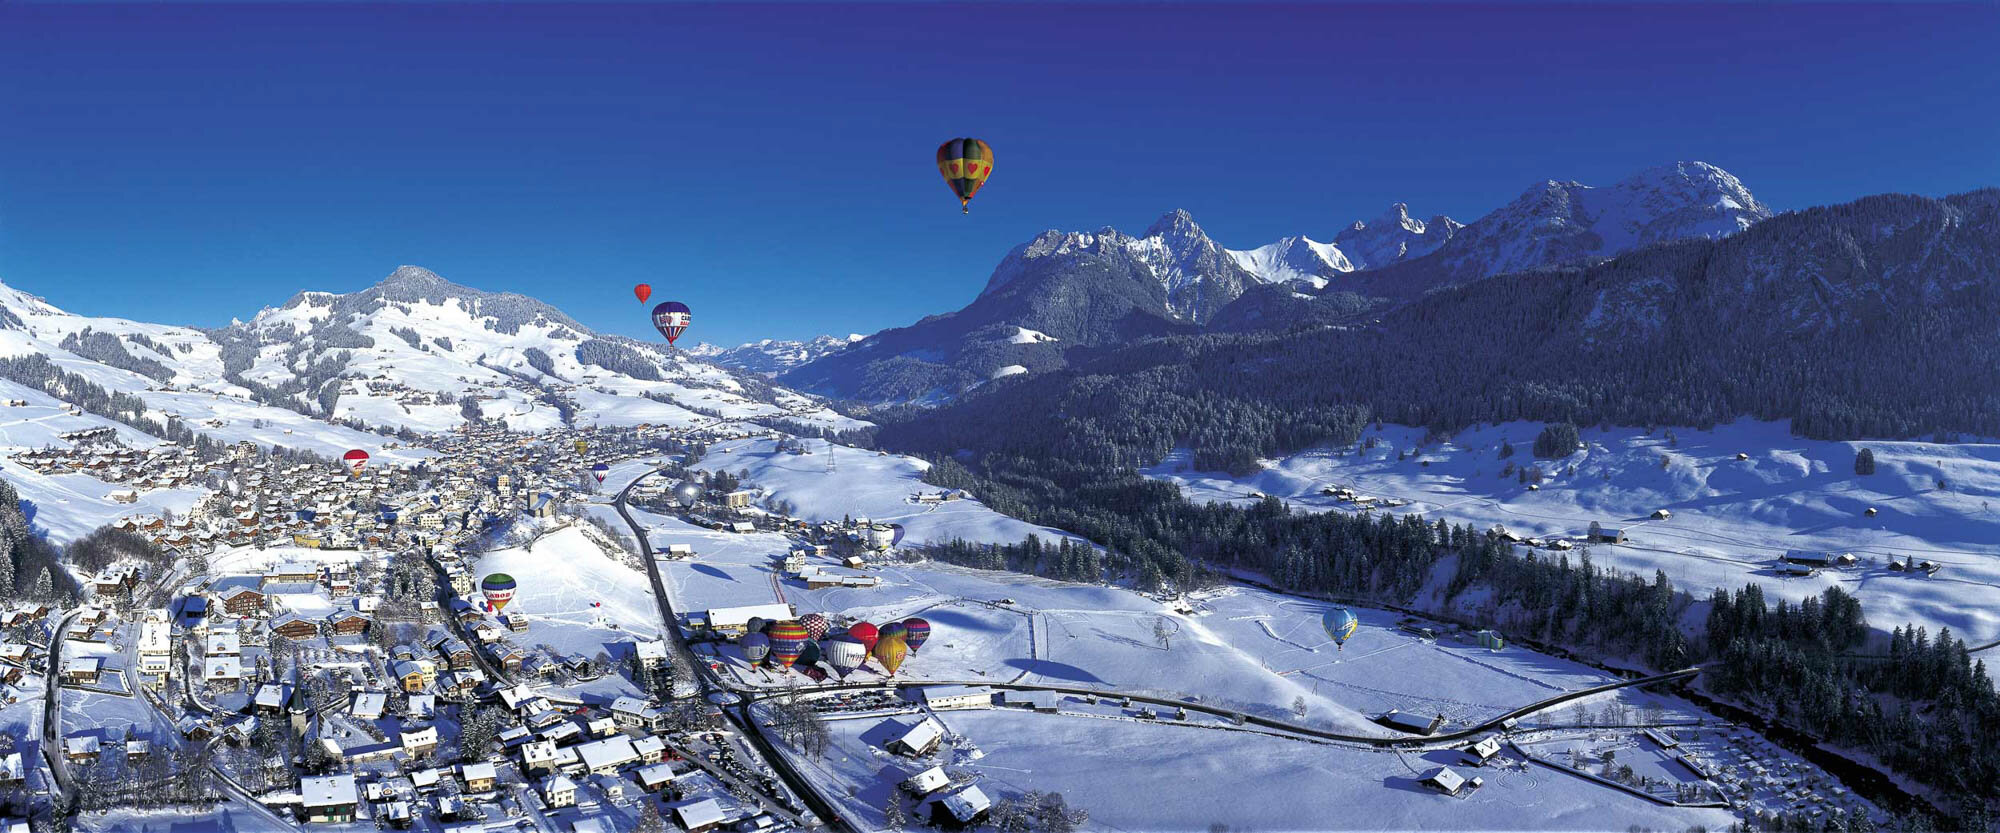 Hot air ballooning at Chateau-d'Oex (1000 m) in the Vaud Alps. Copyright by Switzerland Tourism